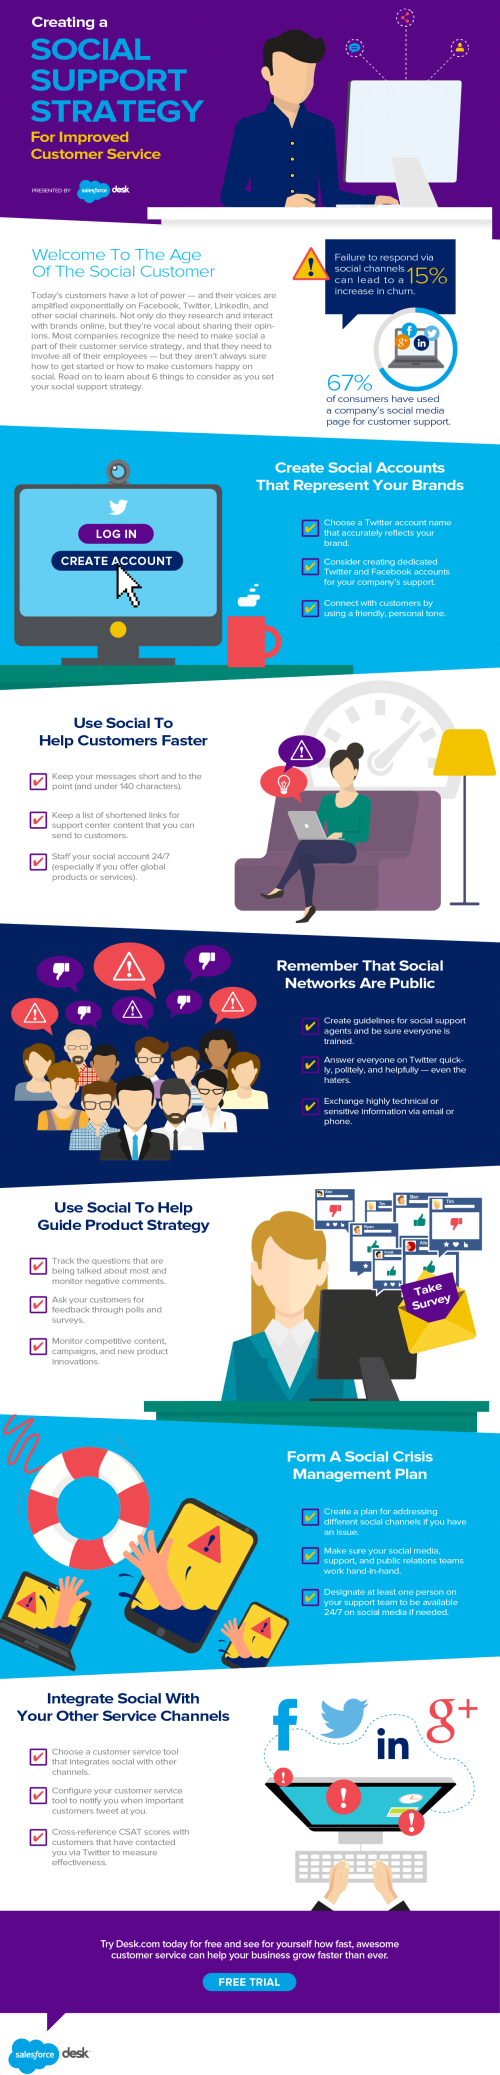 Salesforce infographic on Social Support sales 